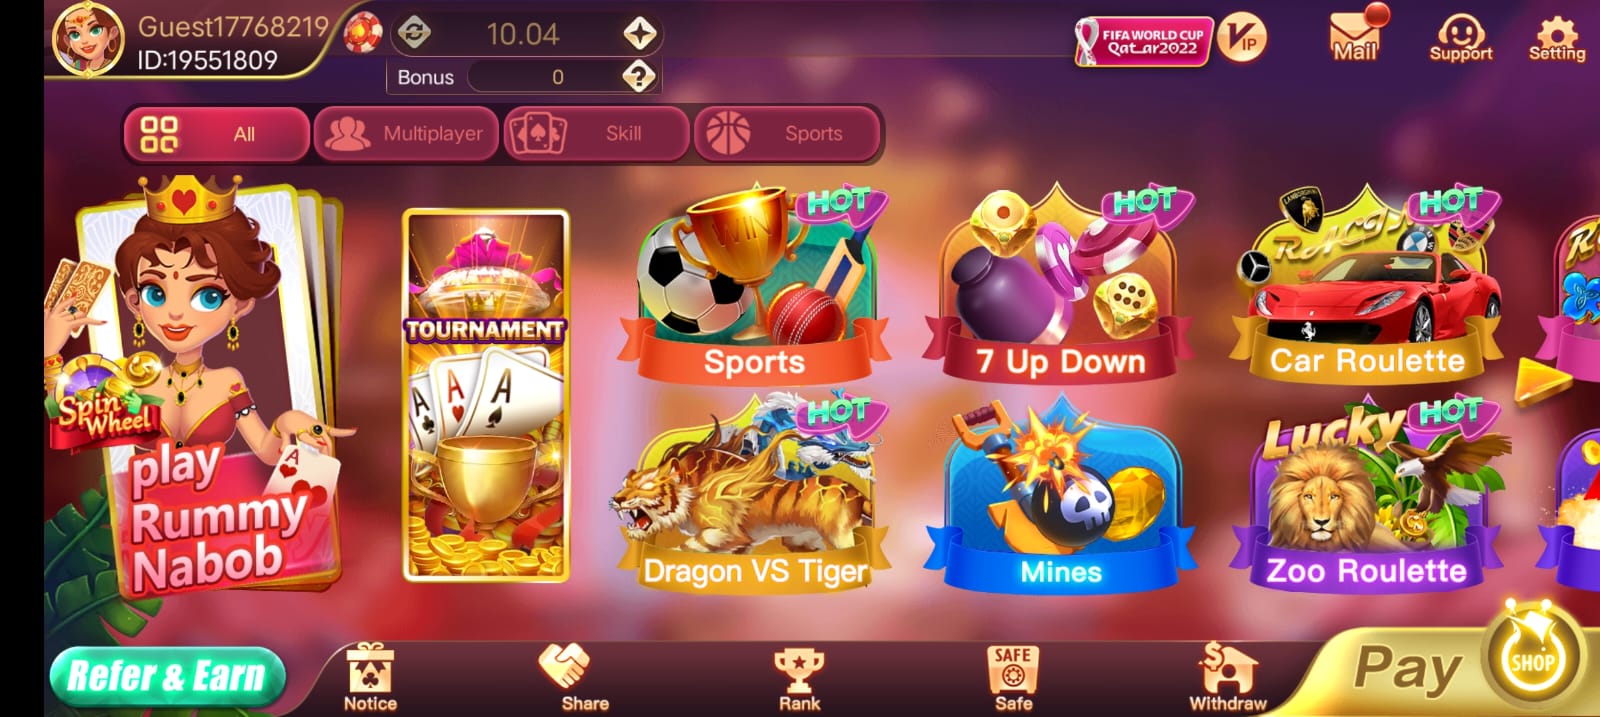 Available Games On Rummy Nabob App